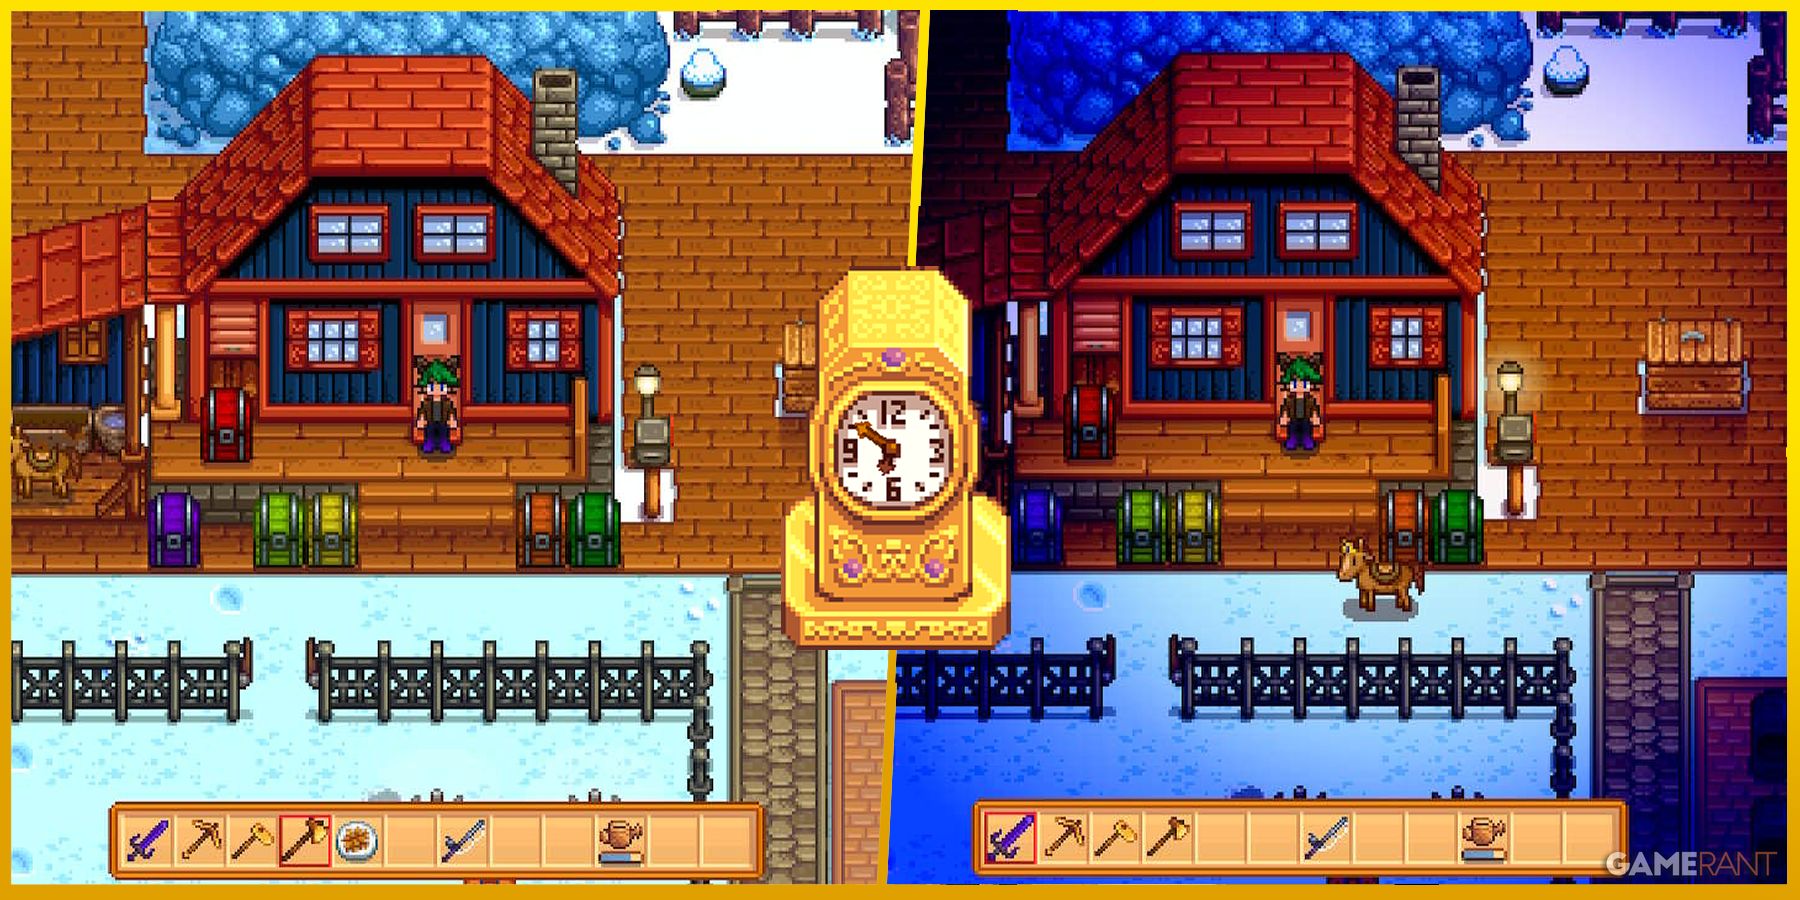 stardew valley - how many hours in a day (feature image)